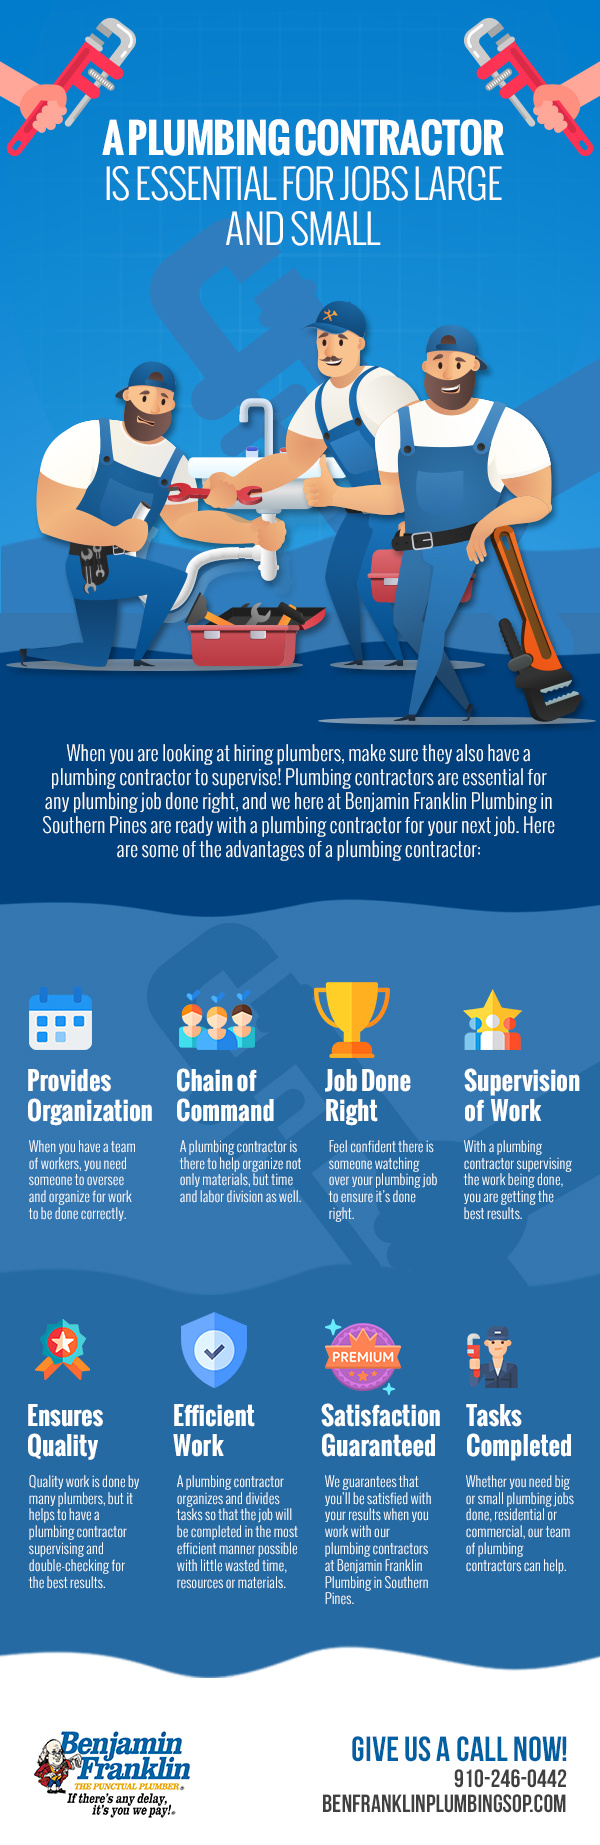 A Plumbing Contractor is Essential for Jobs Large and Small [infographic]